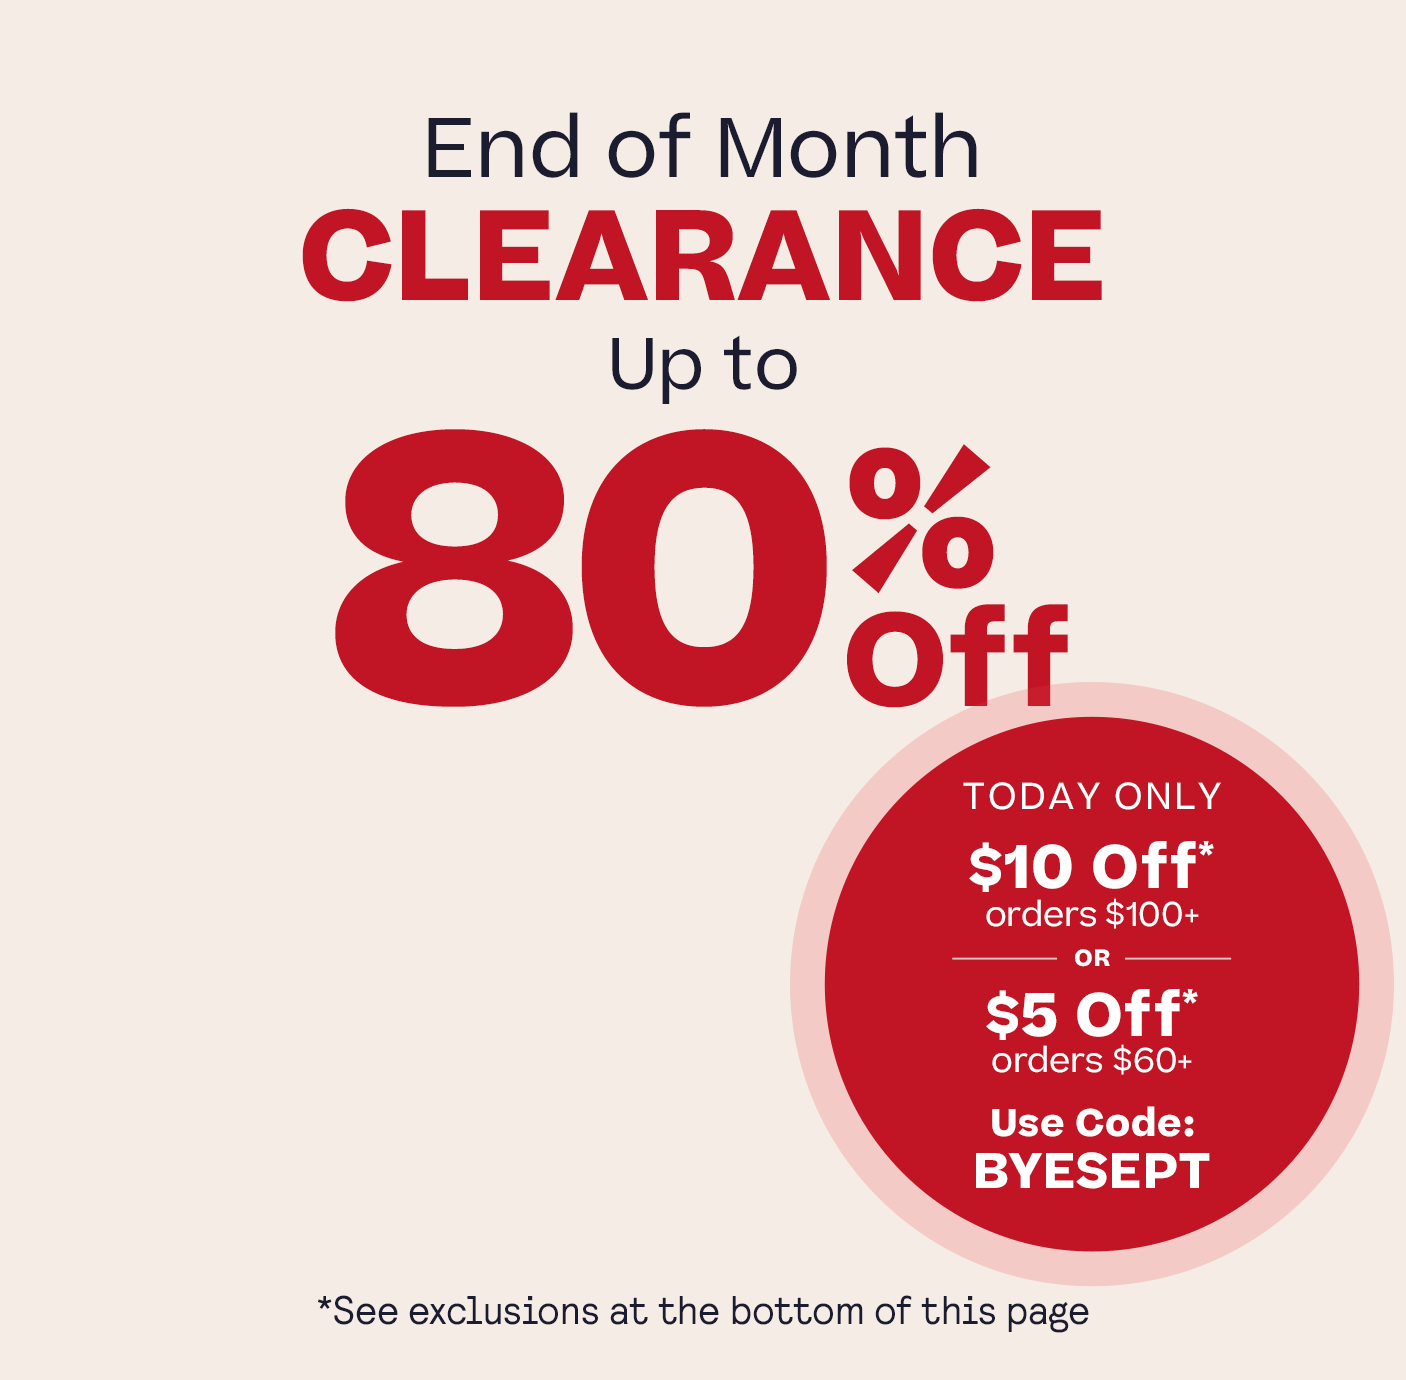 End of Month Clearance Up to 80% Off plus One Day Only
$5 Off $60+  $10 Off $100+ Code BYESEPT see exclusions in footer